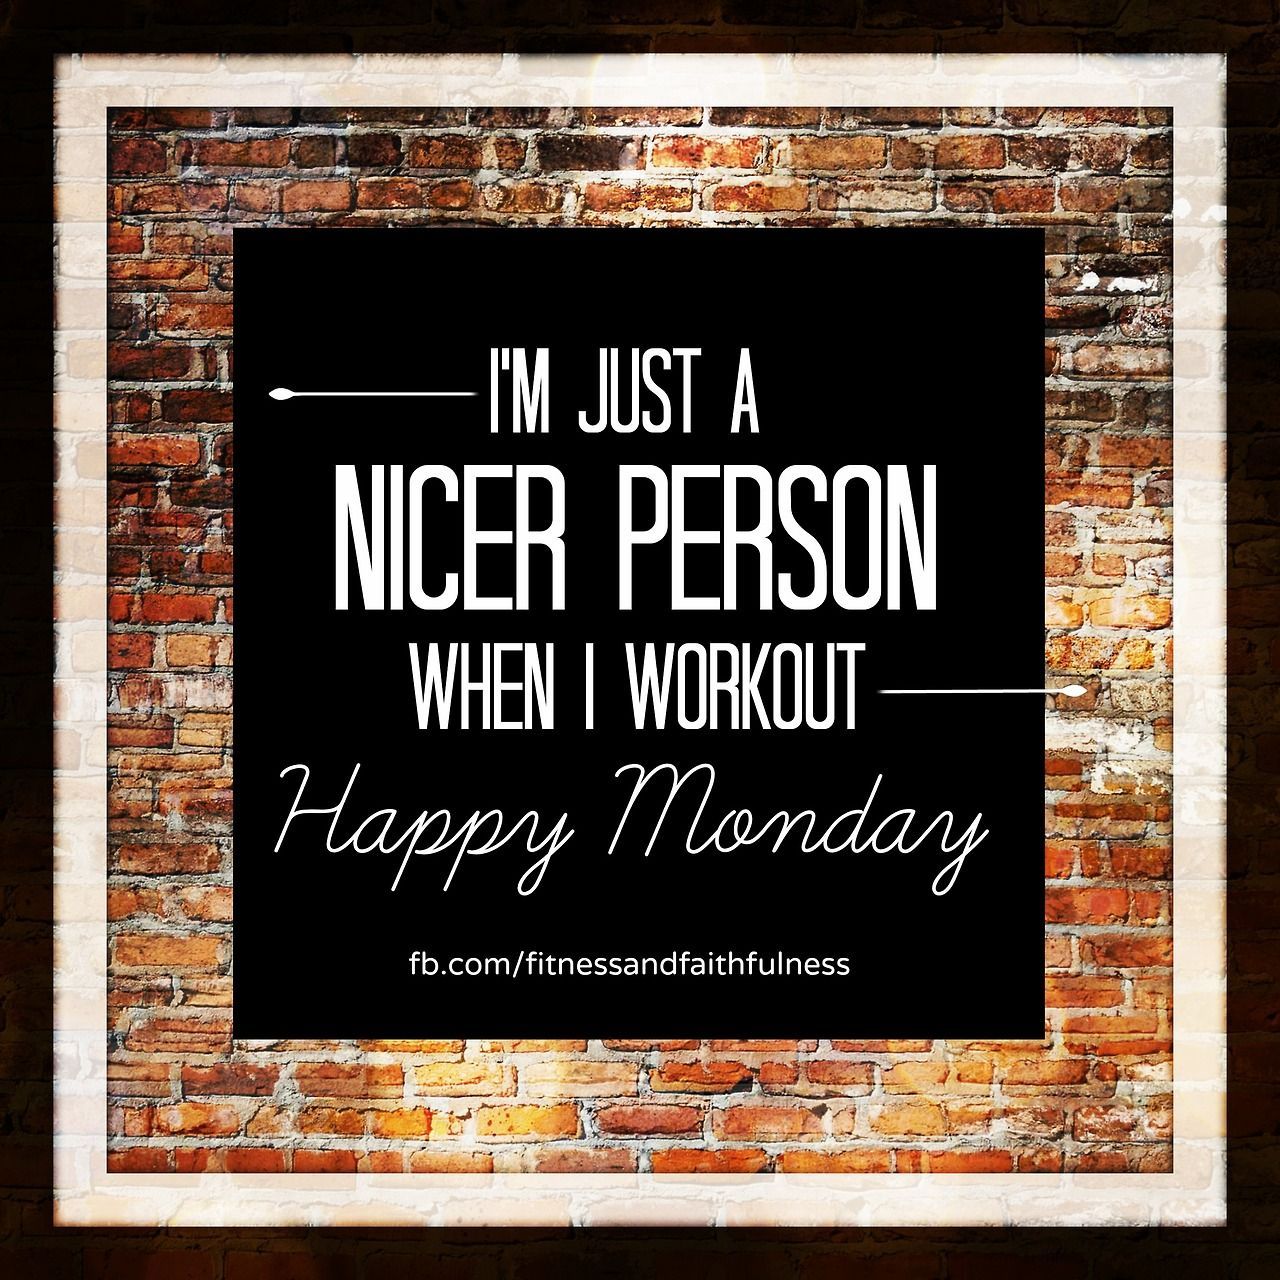 I’m just a NICER person when I workout. HAPPY MONDAY! -Janet -   19 monday fitness humor
 ideas